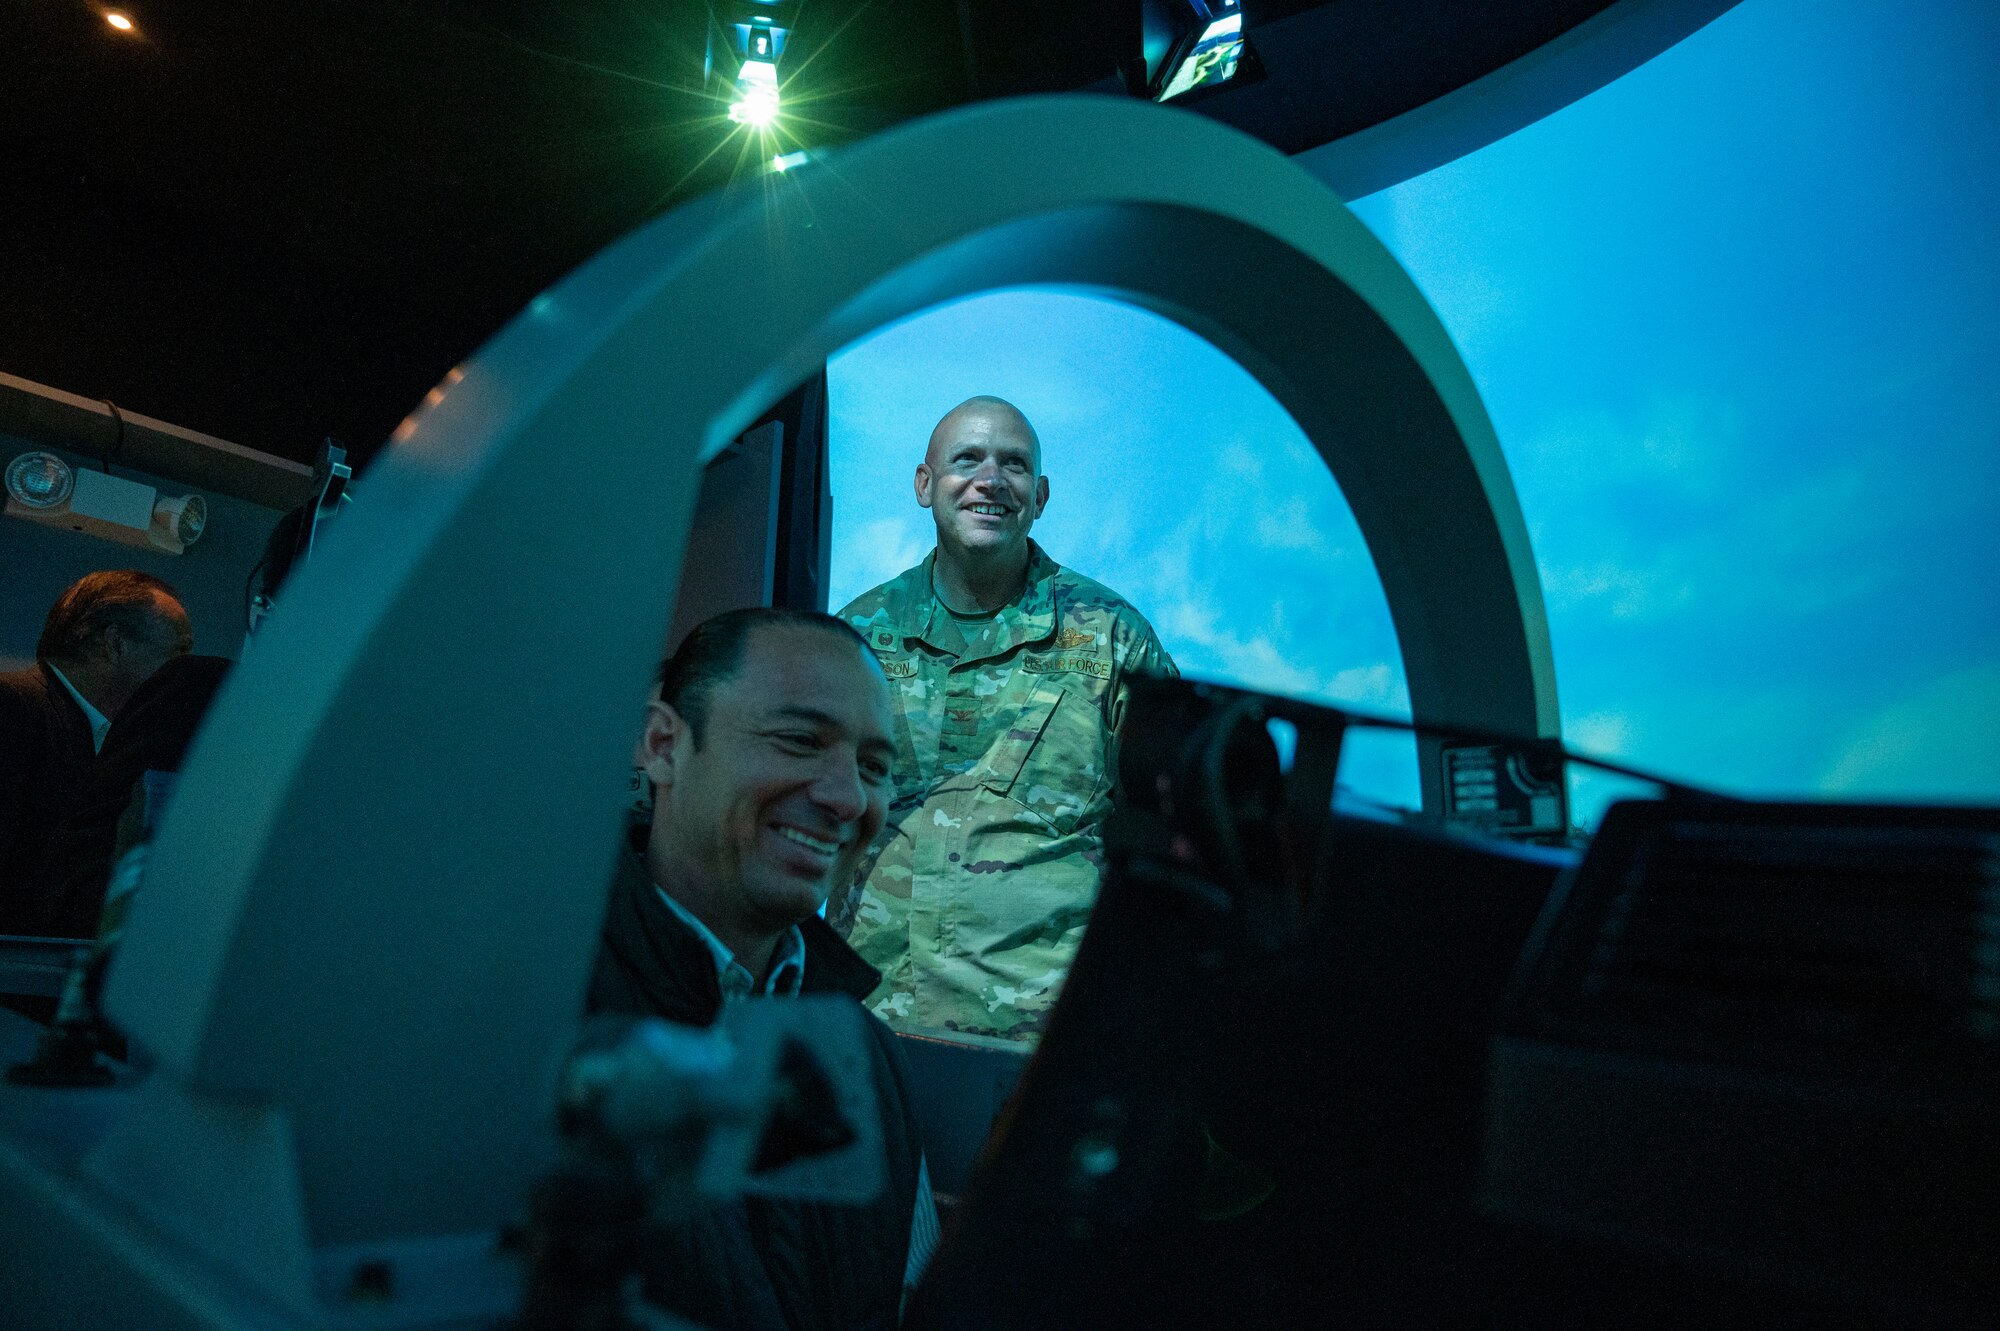 Emilio de Hoyos, Mayor of Ciudad Acuna, sits in the cockpit of a T-6A Texan II simulator while U.S. Air Force Col. Kevin Davidson, 47th Flying Training Wing commander, looks over his shoulder at Laughlin Air Force Base, Texas, Nov. 1, 2022. Laughlin’s mission is to develop U.S. Air Force pilots and the base relies on support from the local community to make that mission a success. Familiarization tours cultivate understating of the wing’s mission and help forge lasting partnerships in the community.  (U.S. Air Force photo by Senior Airman Nicholas Larsen)